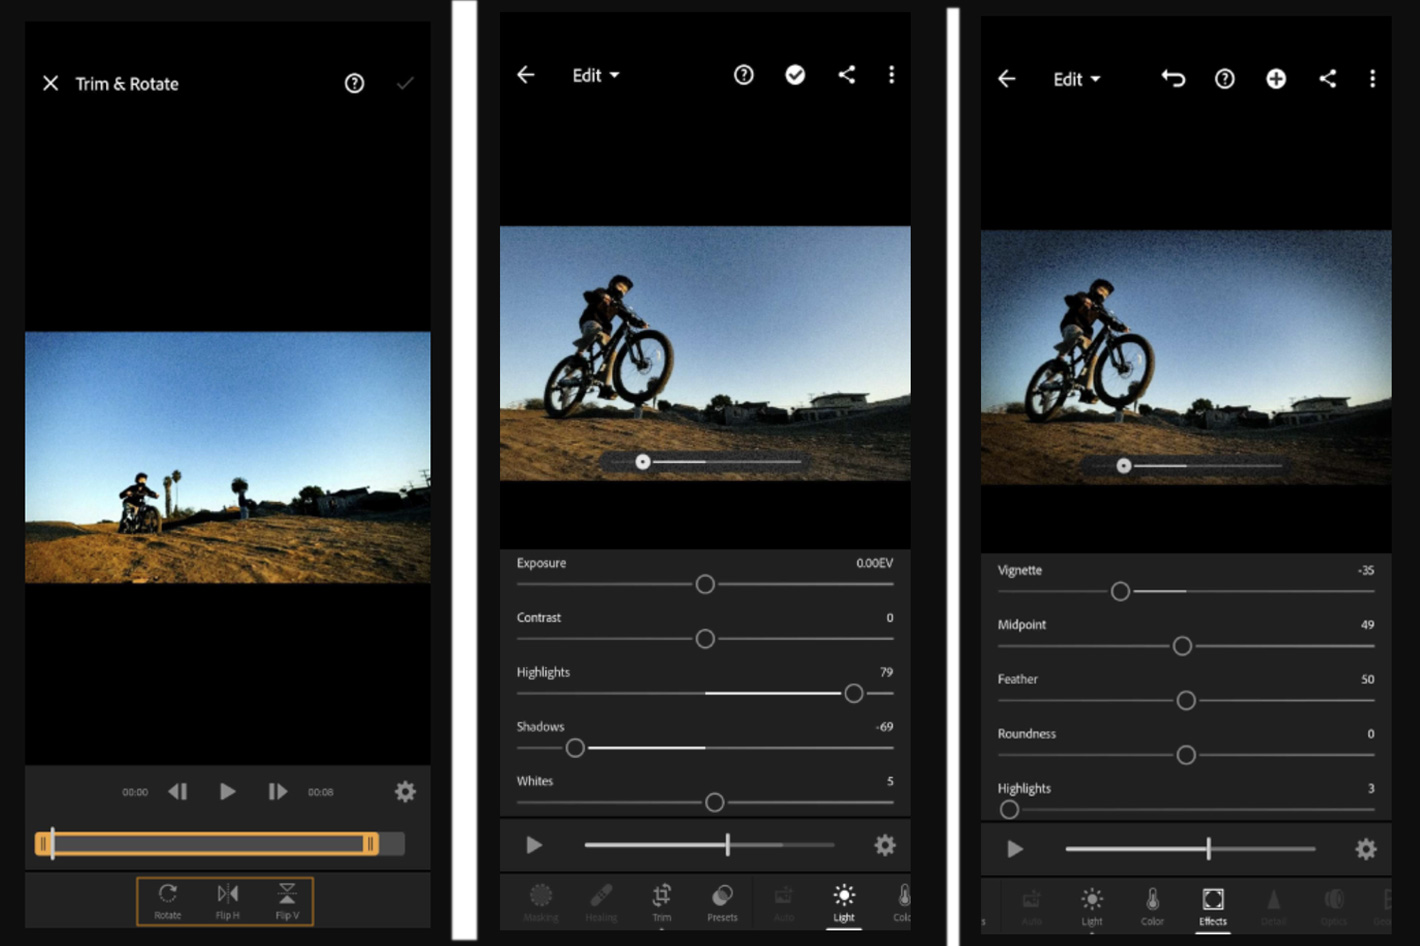 It’s now possible to edit video in Adobe Lightroom